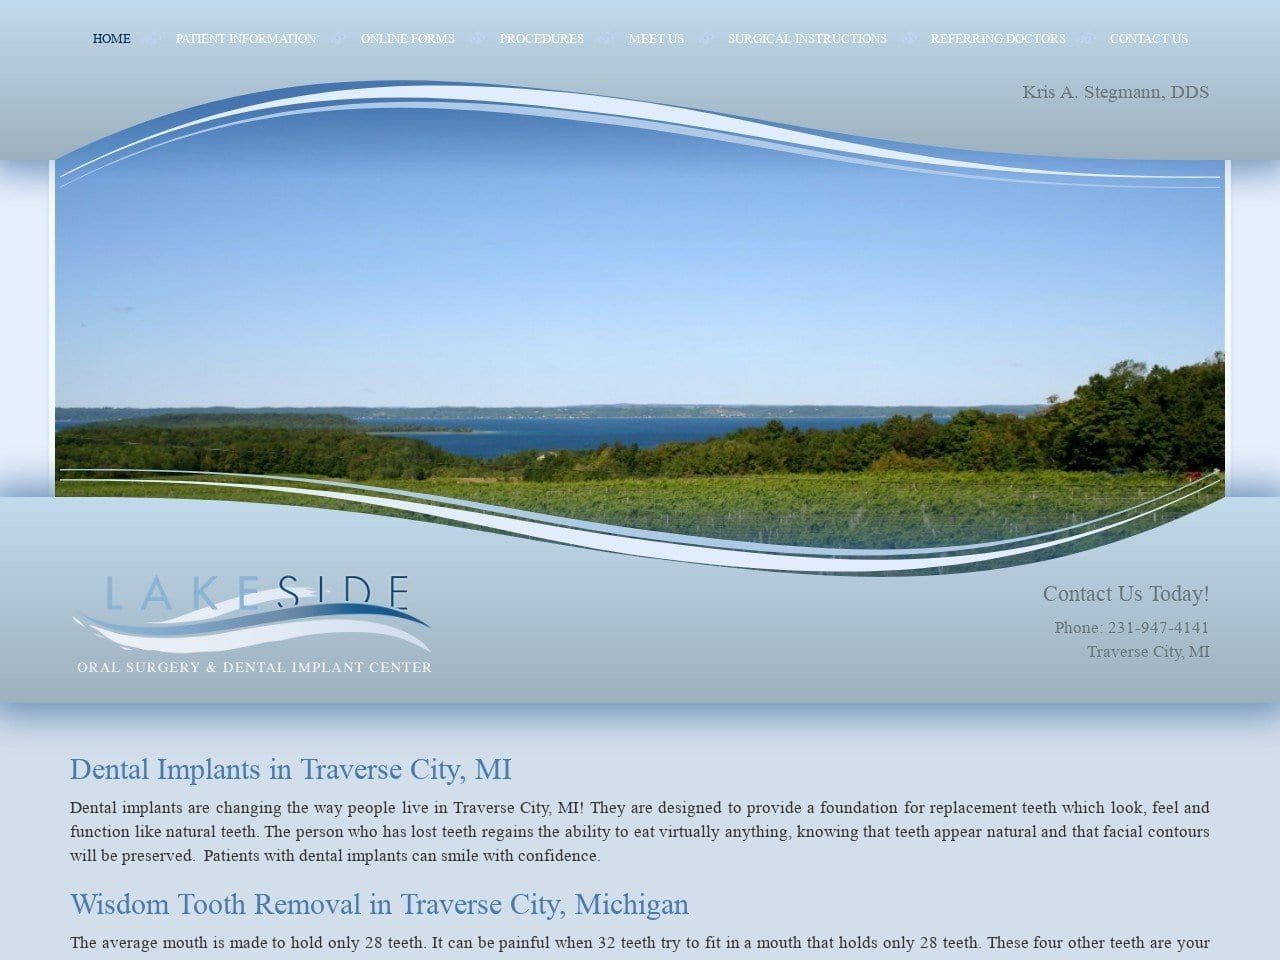 Lakeside Oral Surgery Dentist Website Screenshot from lakesideoralsurgery.com